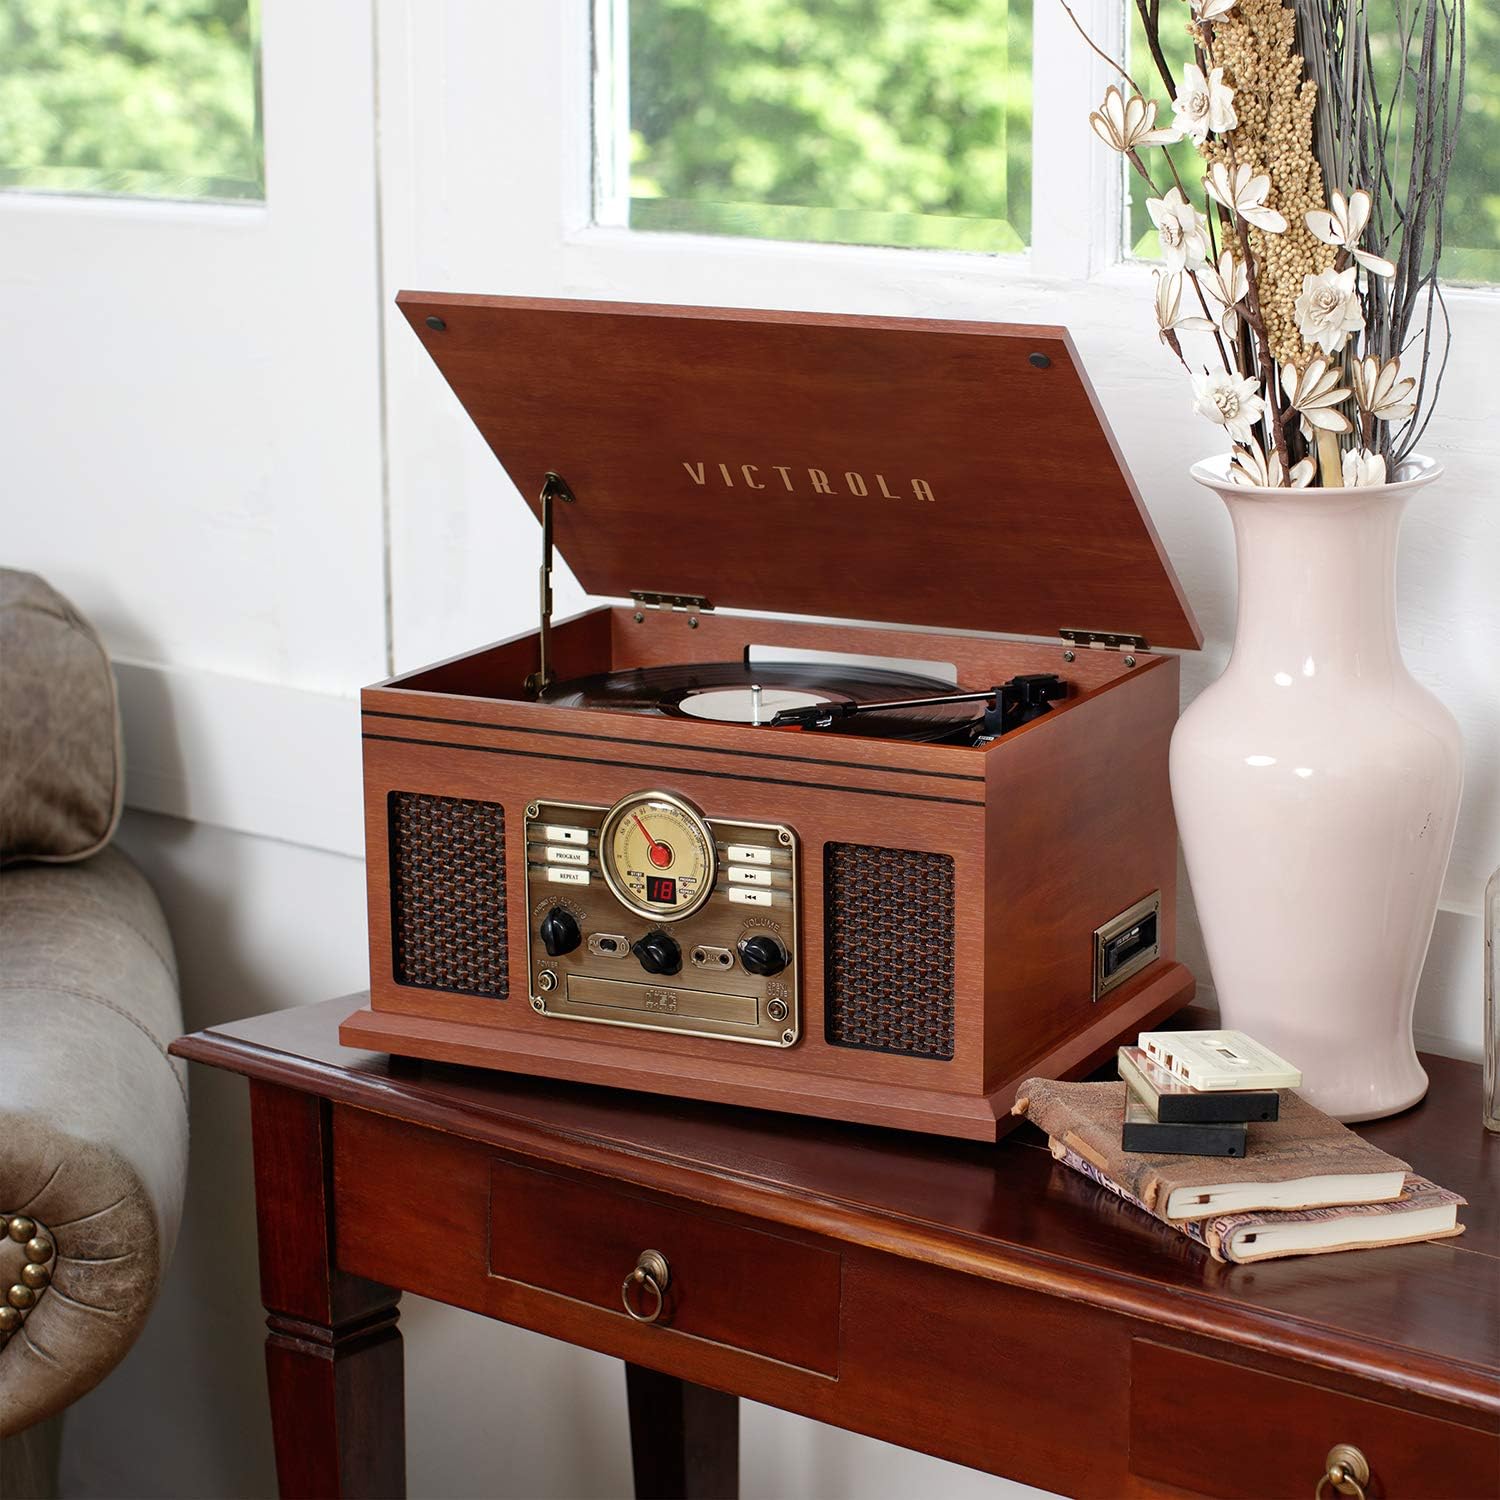 Victrola Nostalgic 6-in-1 Bluetooth Account Player & Multimedia Center with Built-in Speakers - 3-Speed Turntable, CD & Cassette Player, FM Radio | Wireless Music Streaming | Mahogany